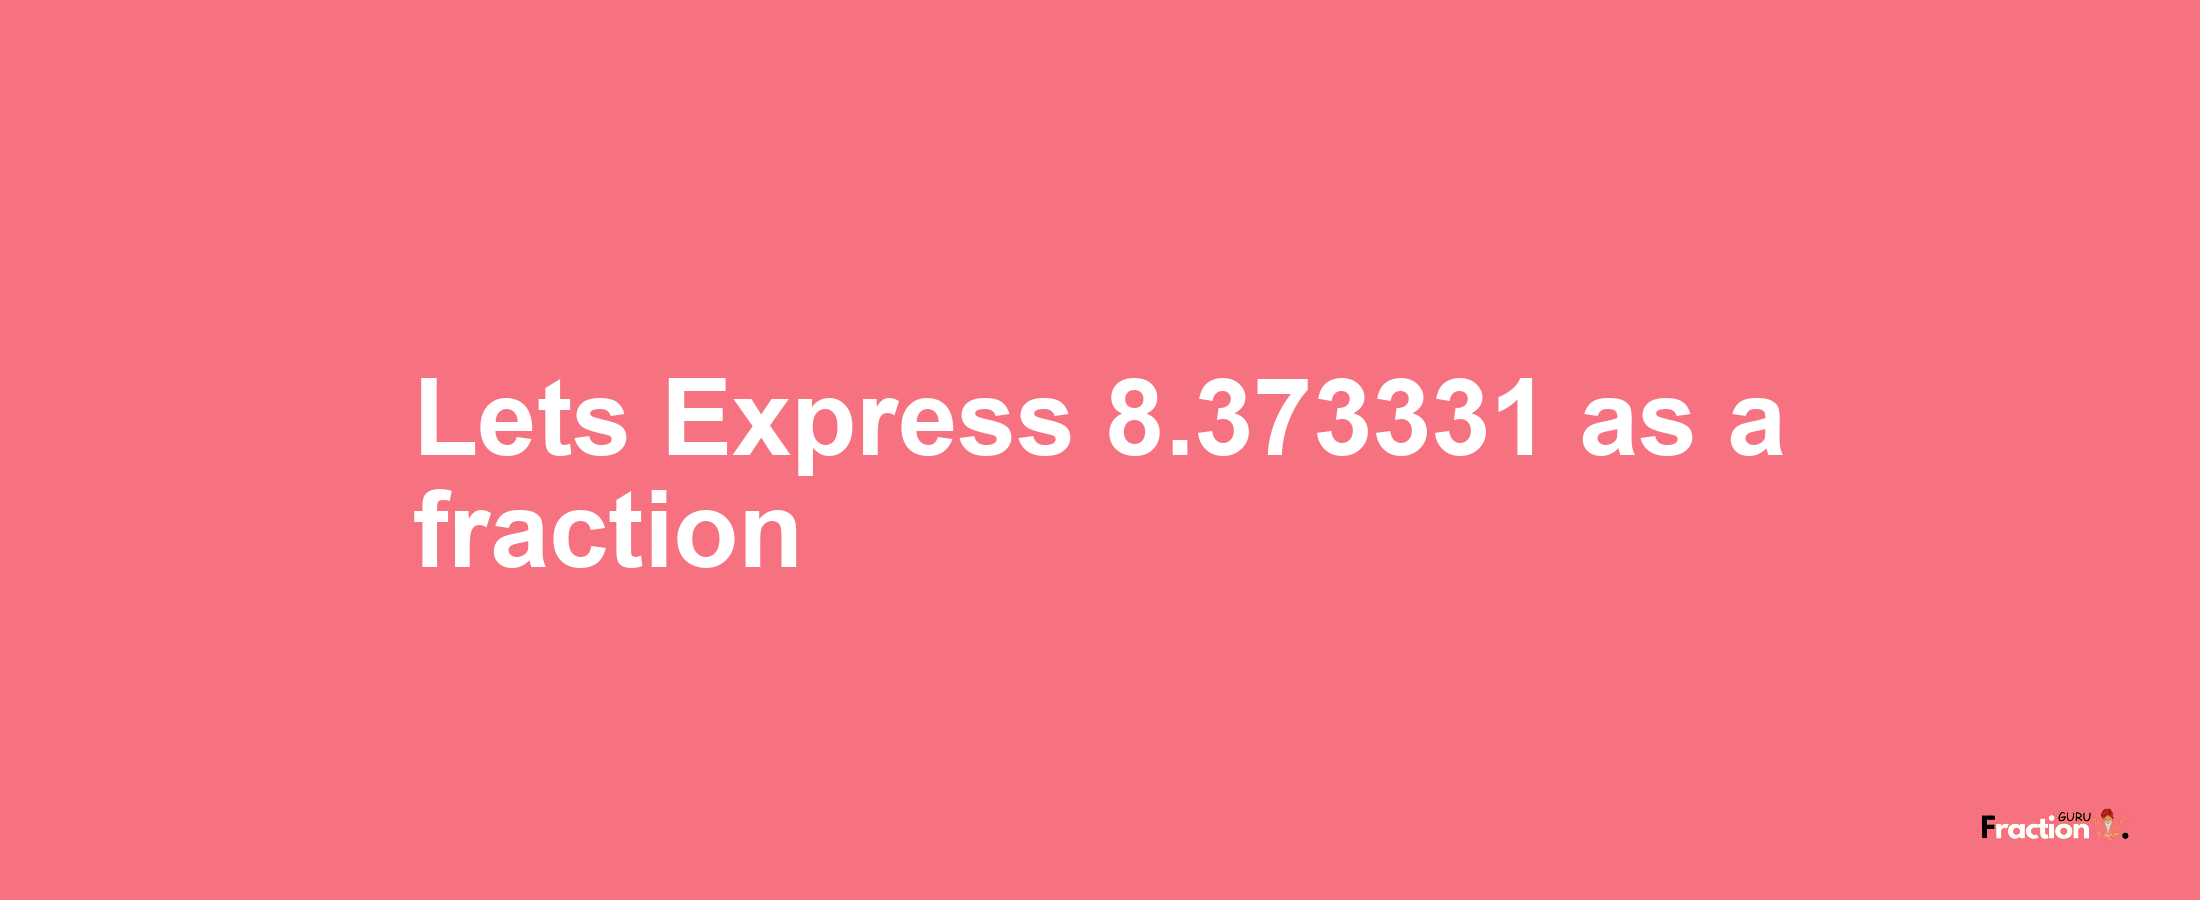 Lets Express 8.373331 as afraction